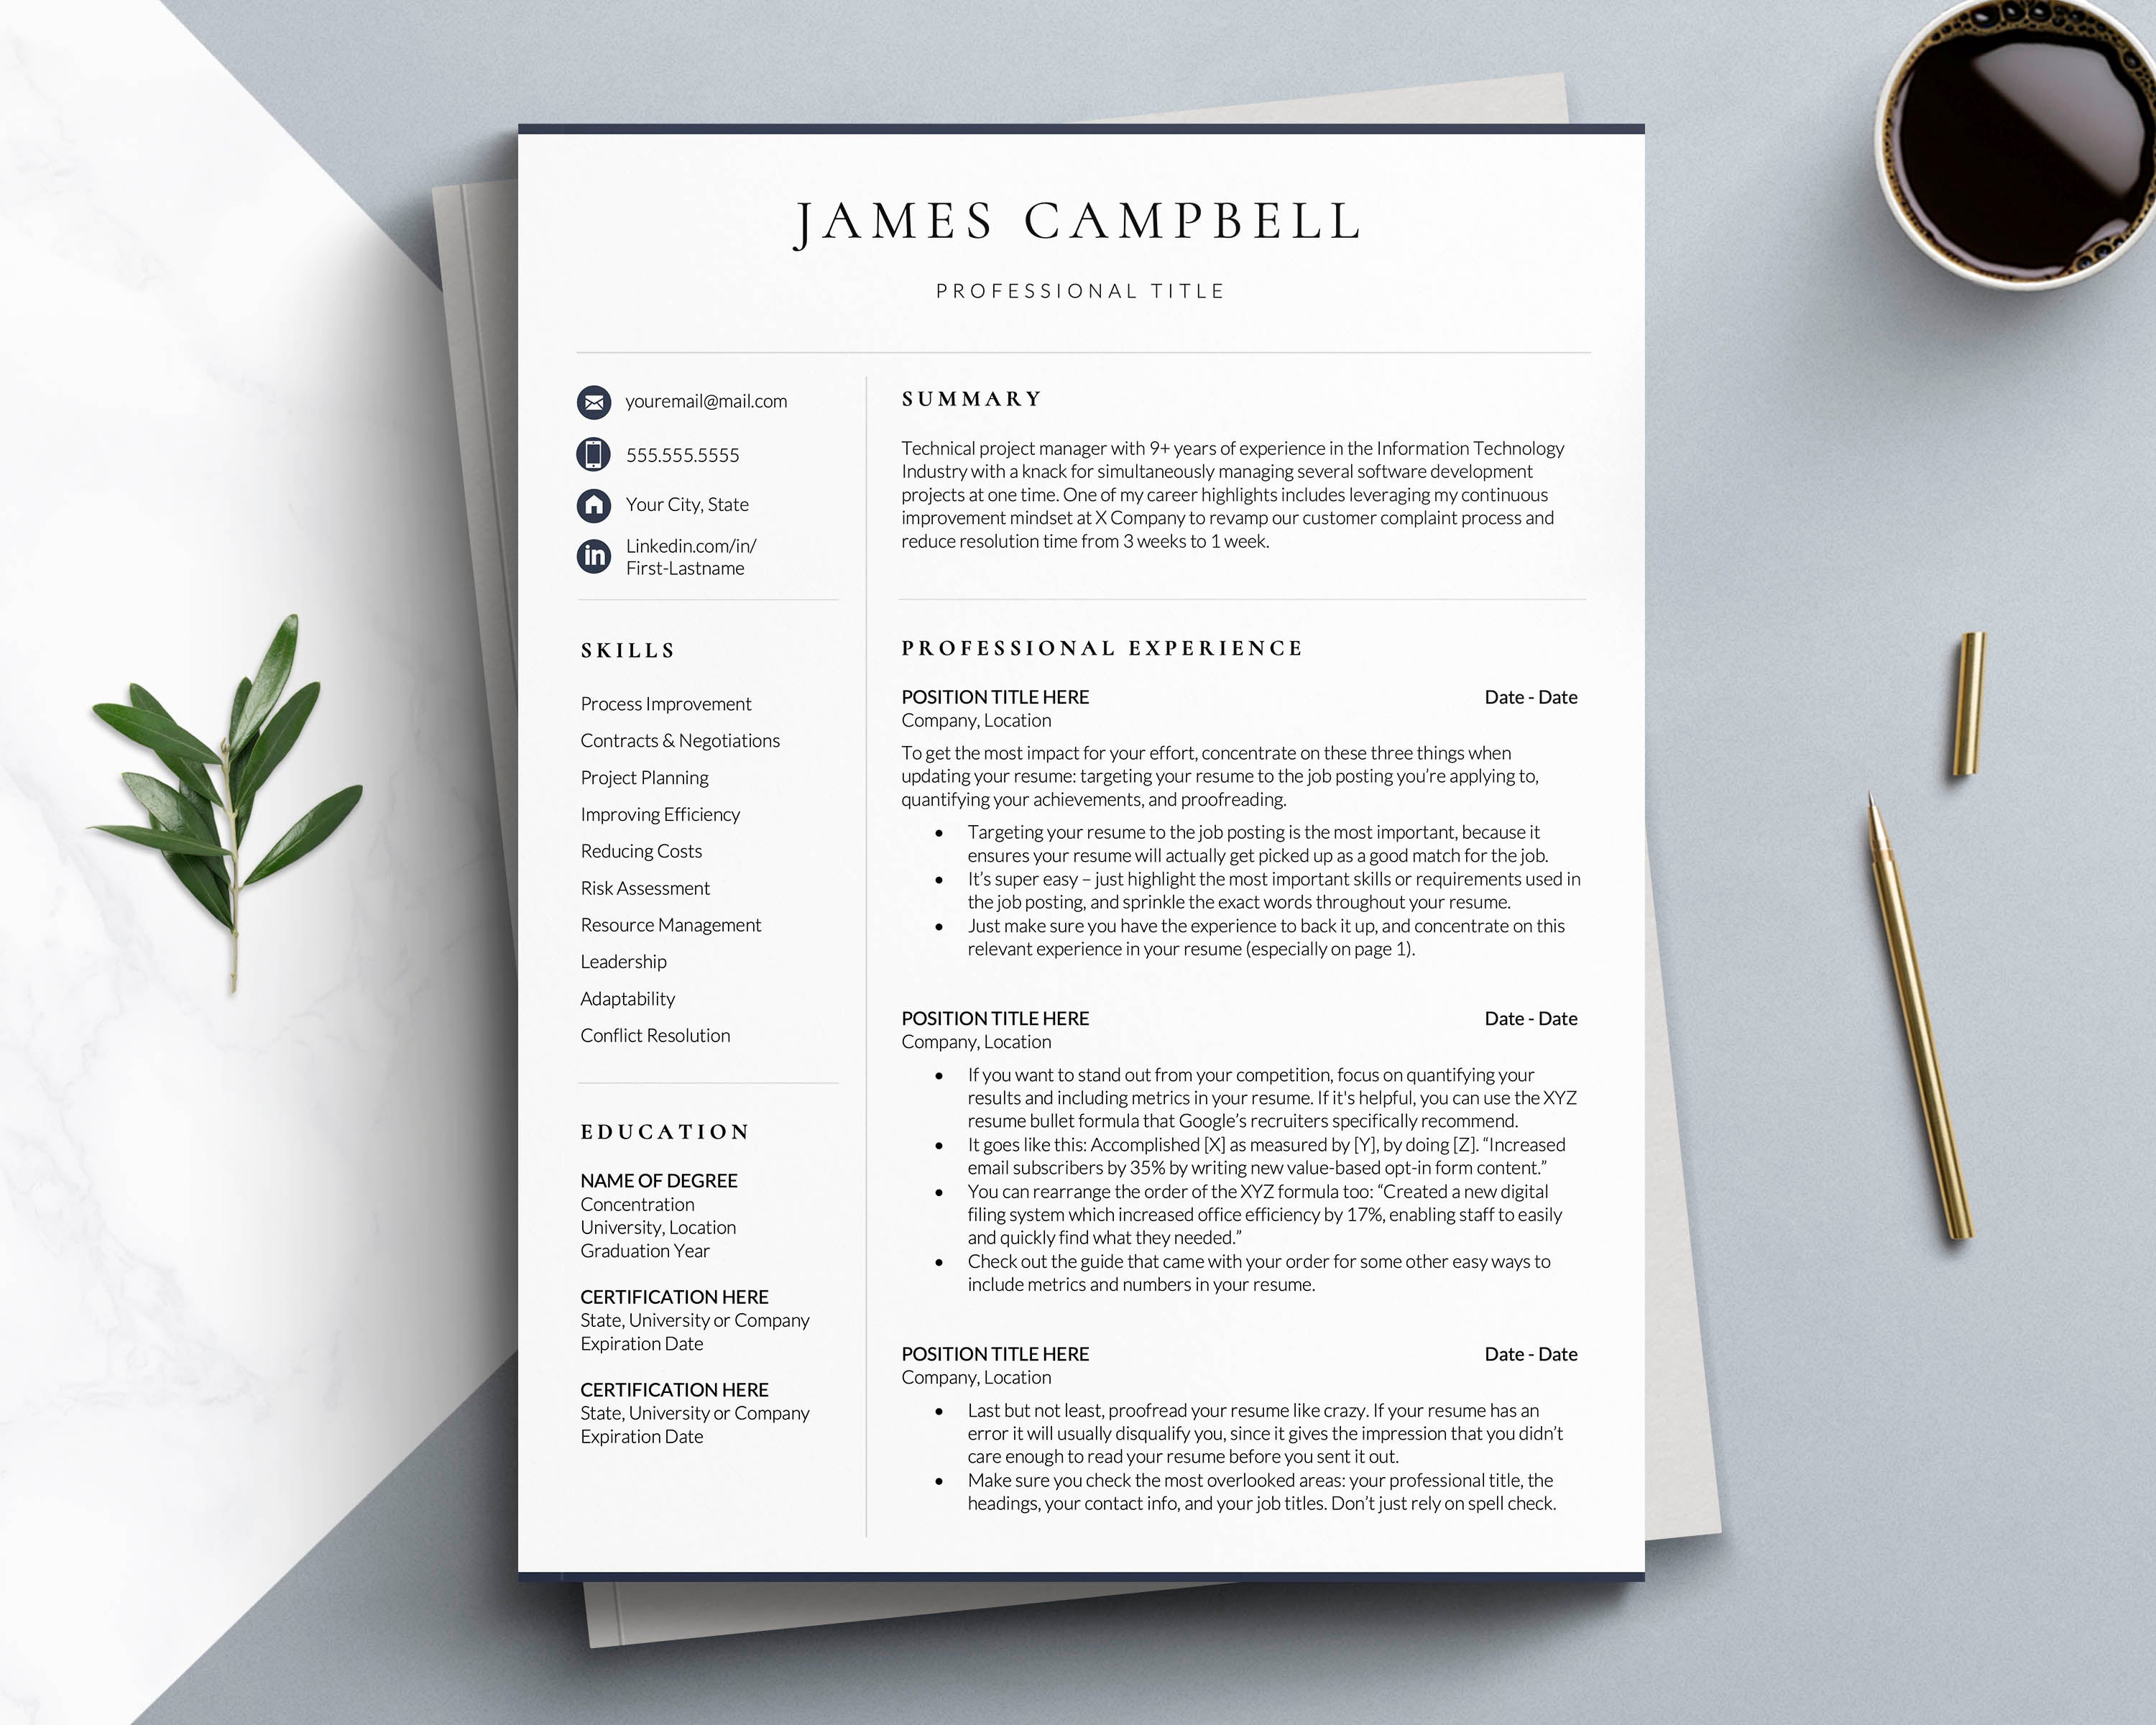 Business analyst resume template, sales executive resume